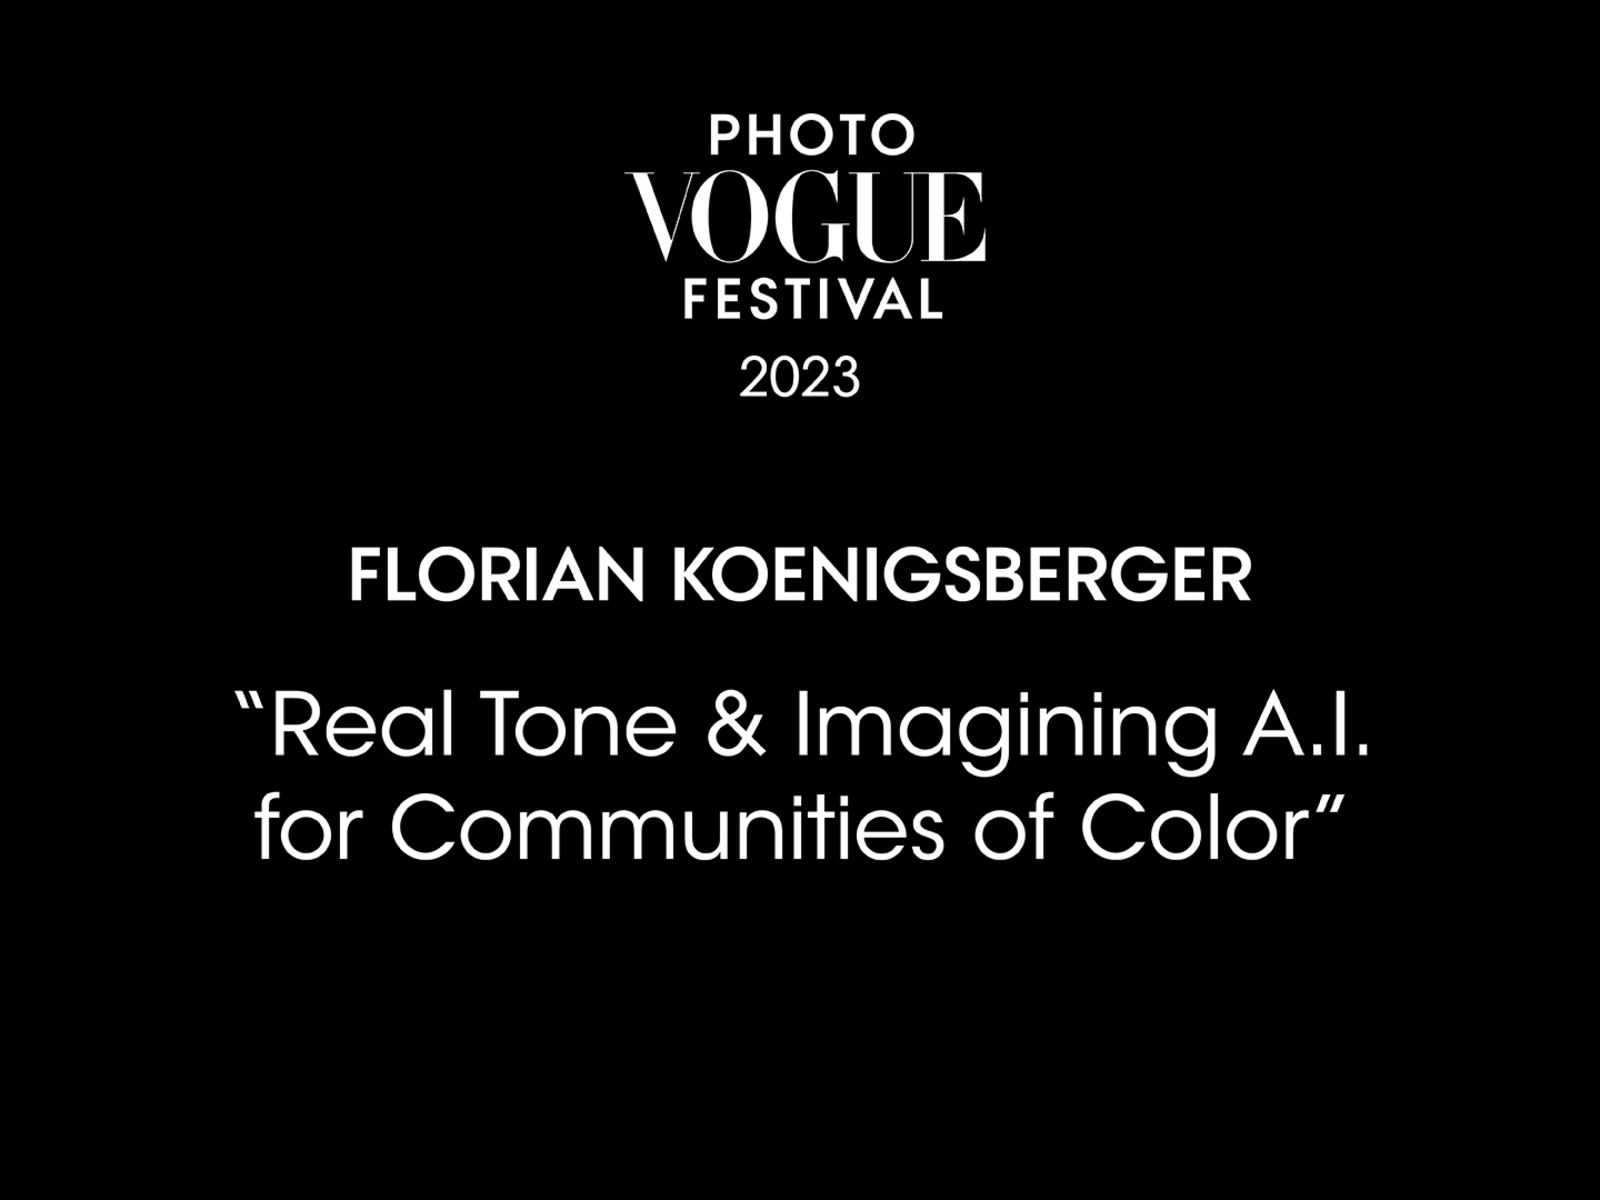 Real Tone & Imagining A.I. for Communities of Color | PhotoVogue Festival 2023: What Makes Us Human? Image in the Age of A.I.